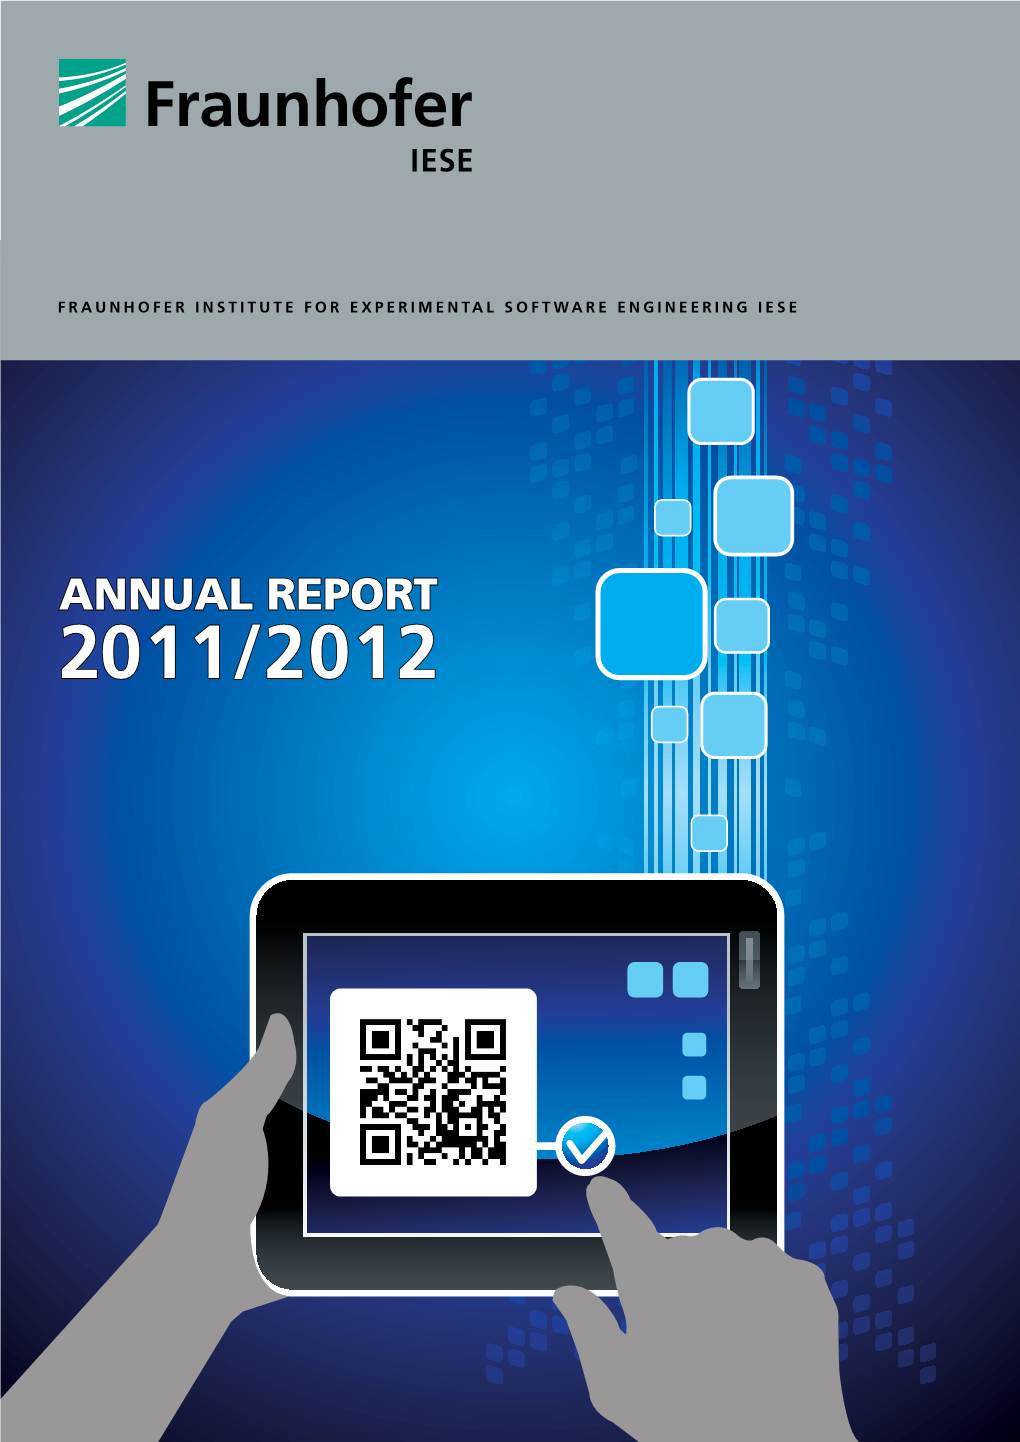 More on 2011 in the Annual Report